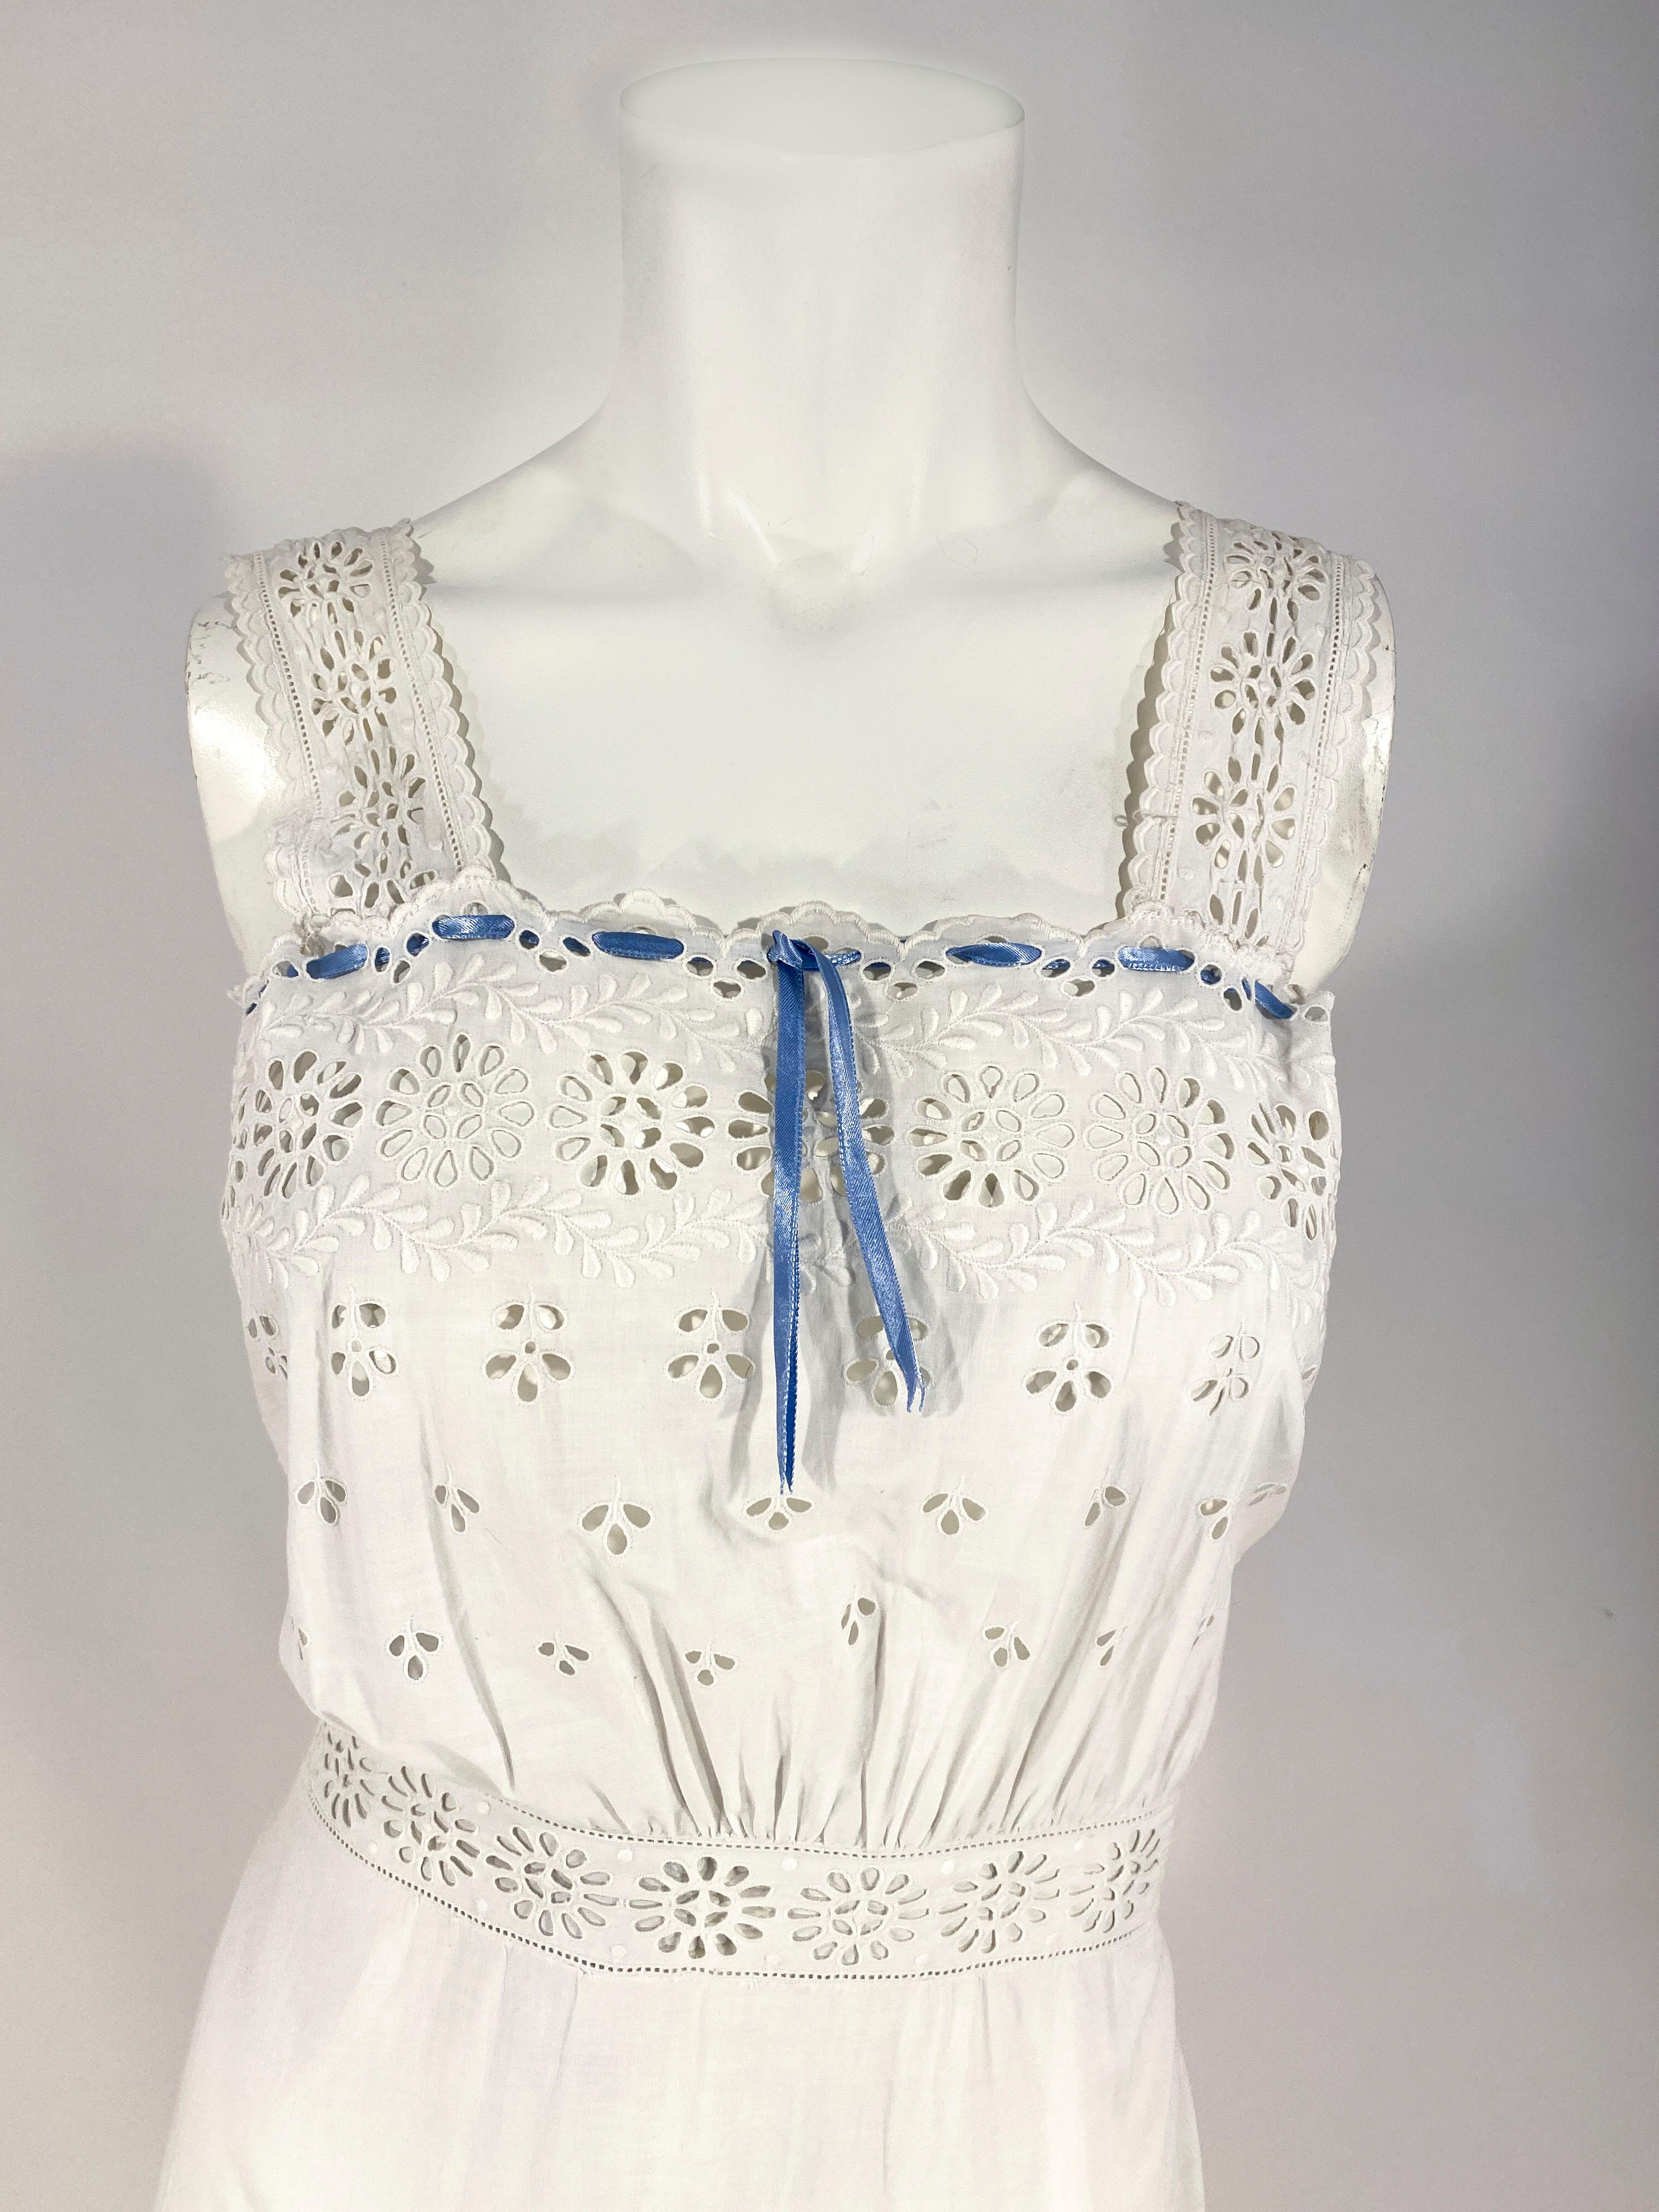 1900s Edwardian whit cotton under petticoat that could easily be worn as a day dress. The garment features eyelet patters, machine embroidery, bands of eyelet trim on skirt and straps, and a ruffled hem. The top of the bust has a blue silk ribbon to